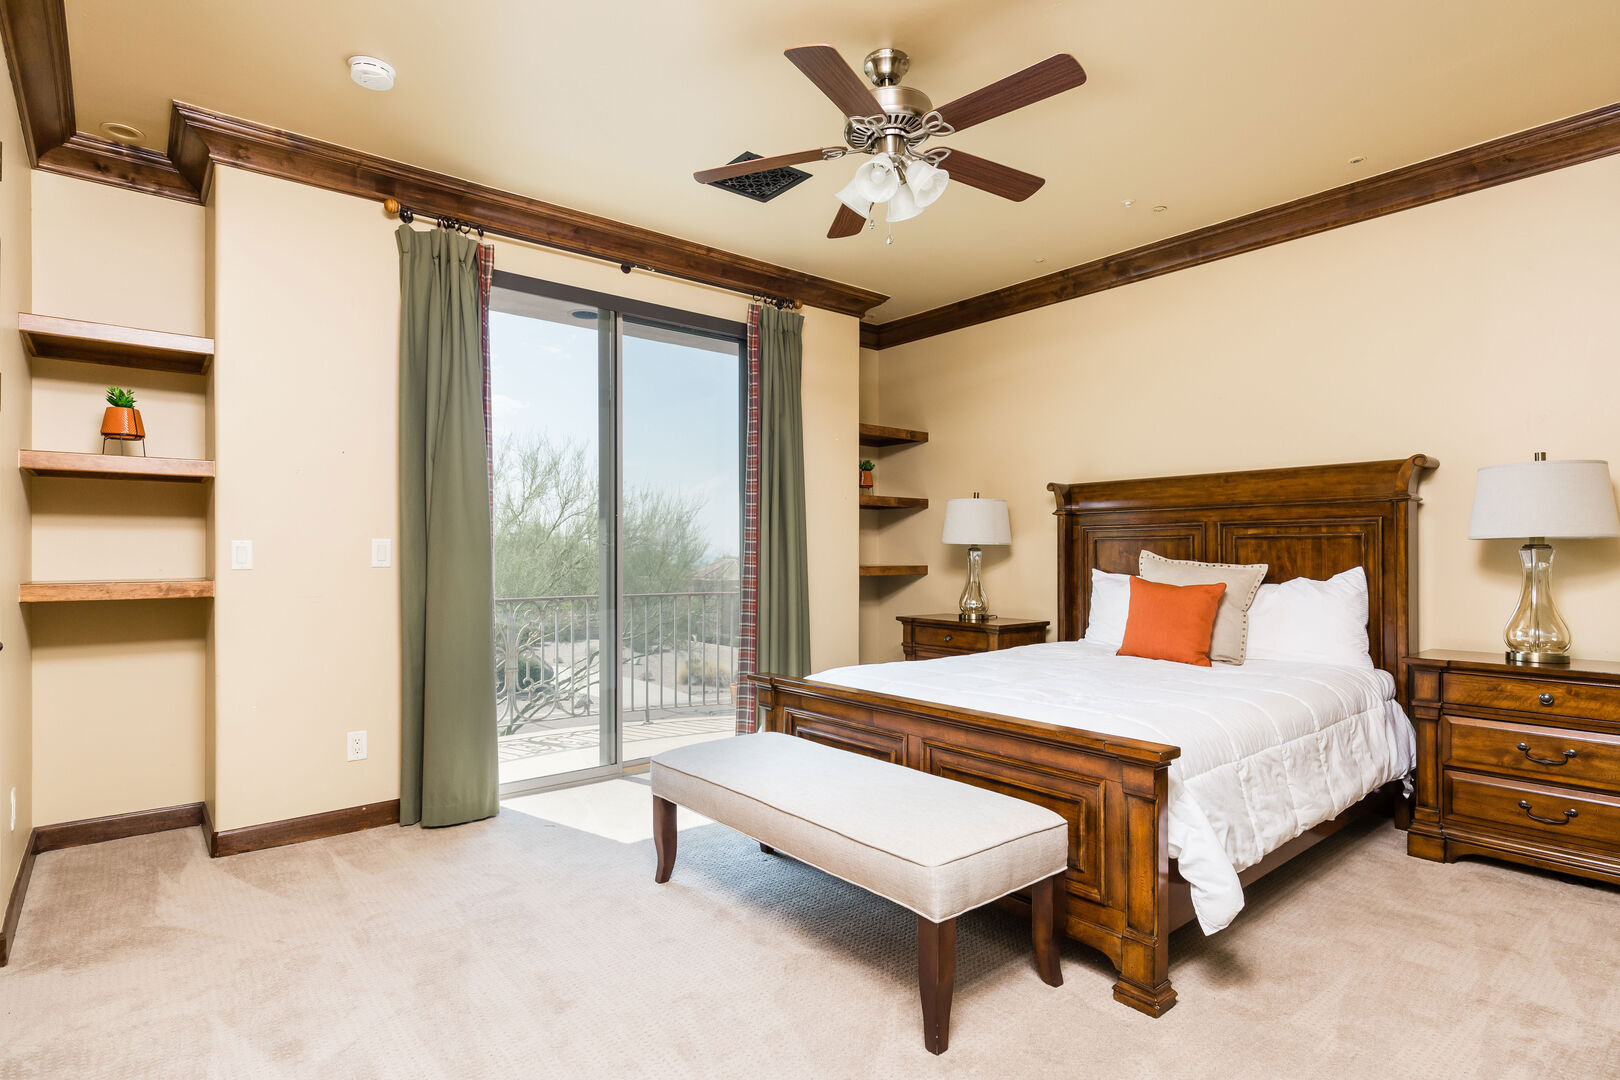 5th Bedroom featuring a Queen Bed with a Smart TV, bedroom furnishings and an ensuite bathroom.